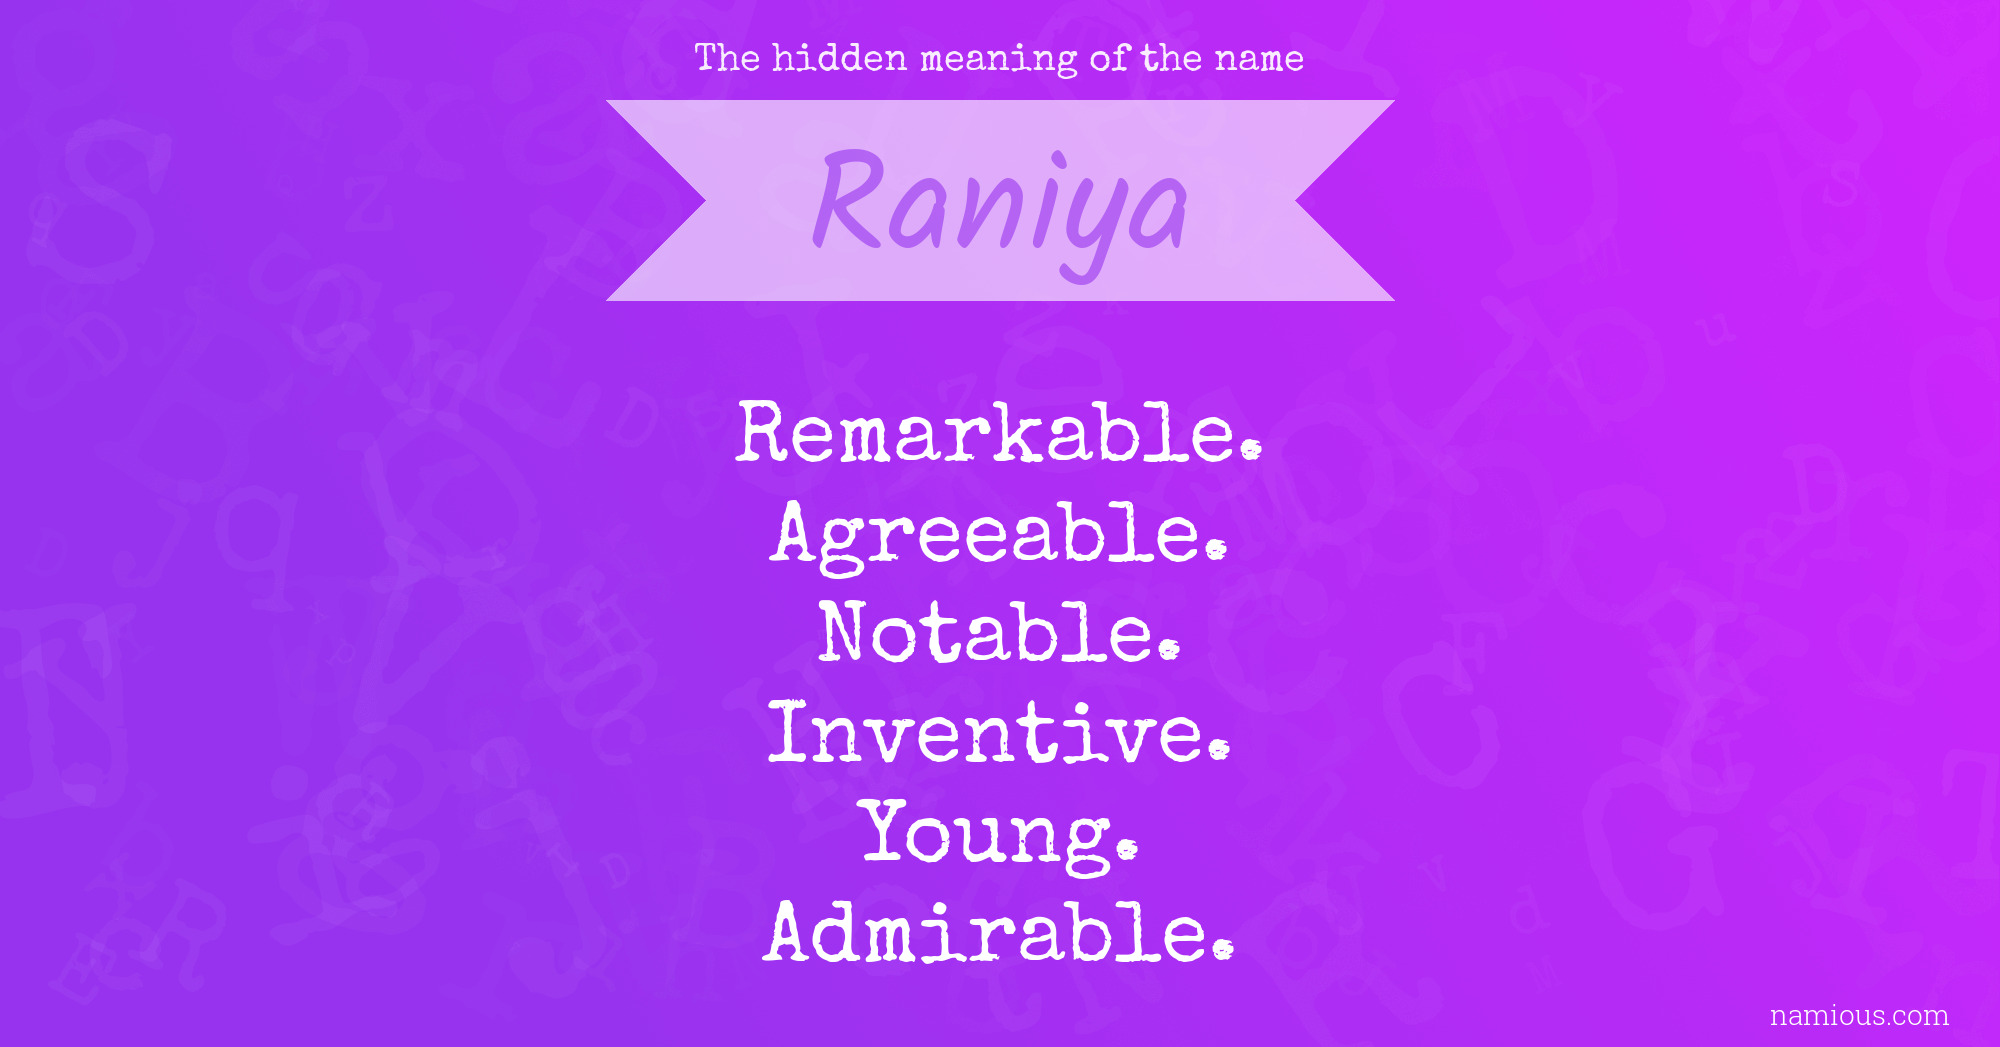 The hidden meaning of the name Raniya